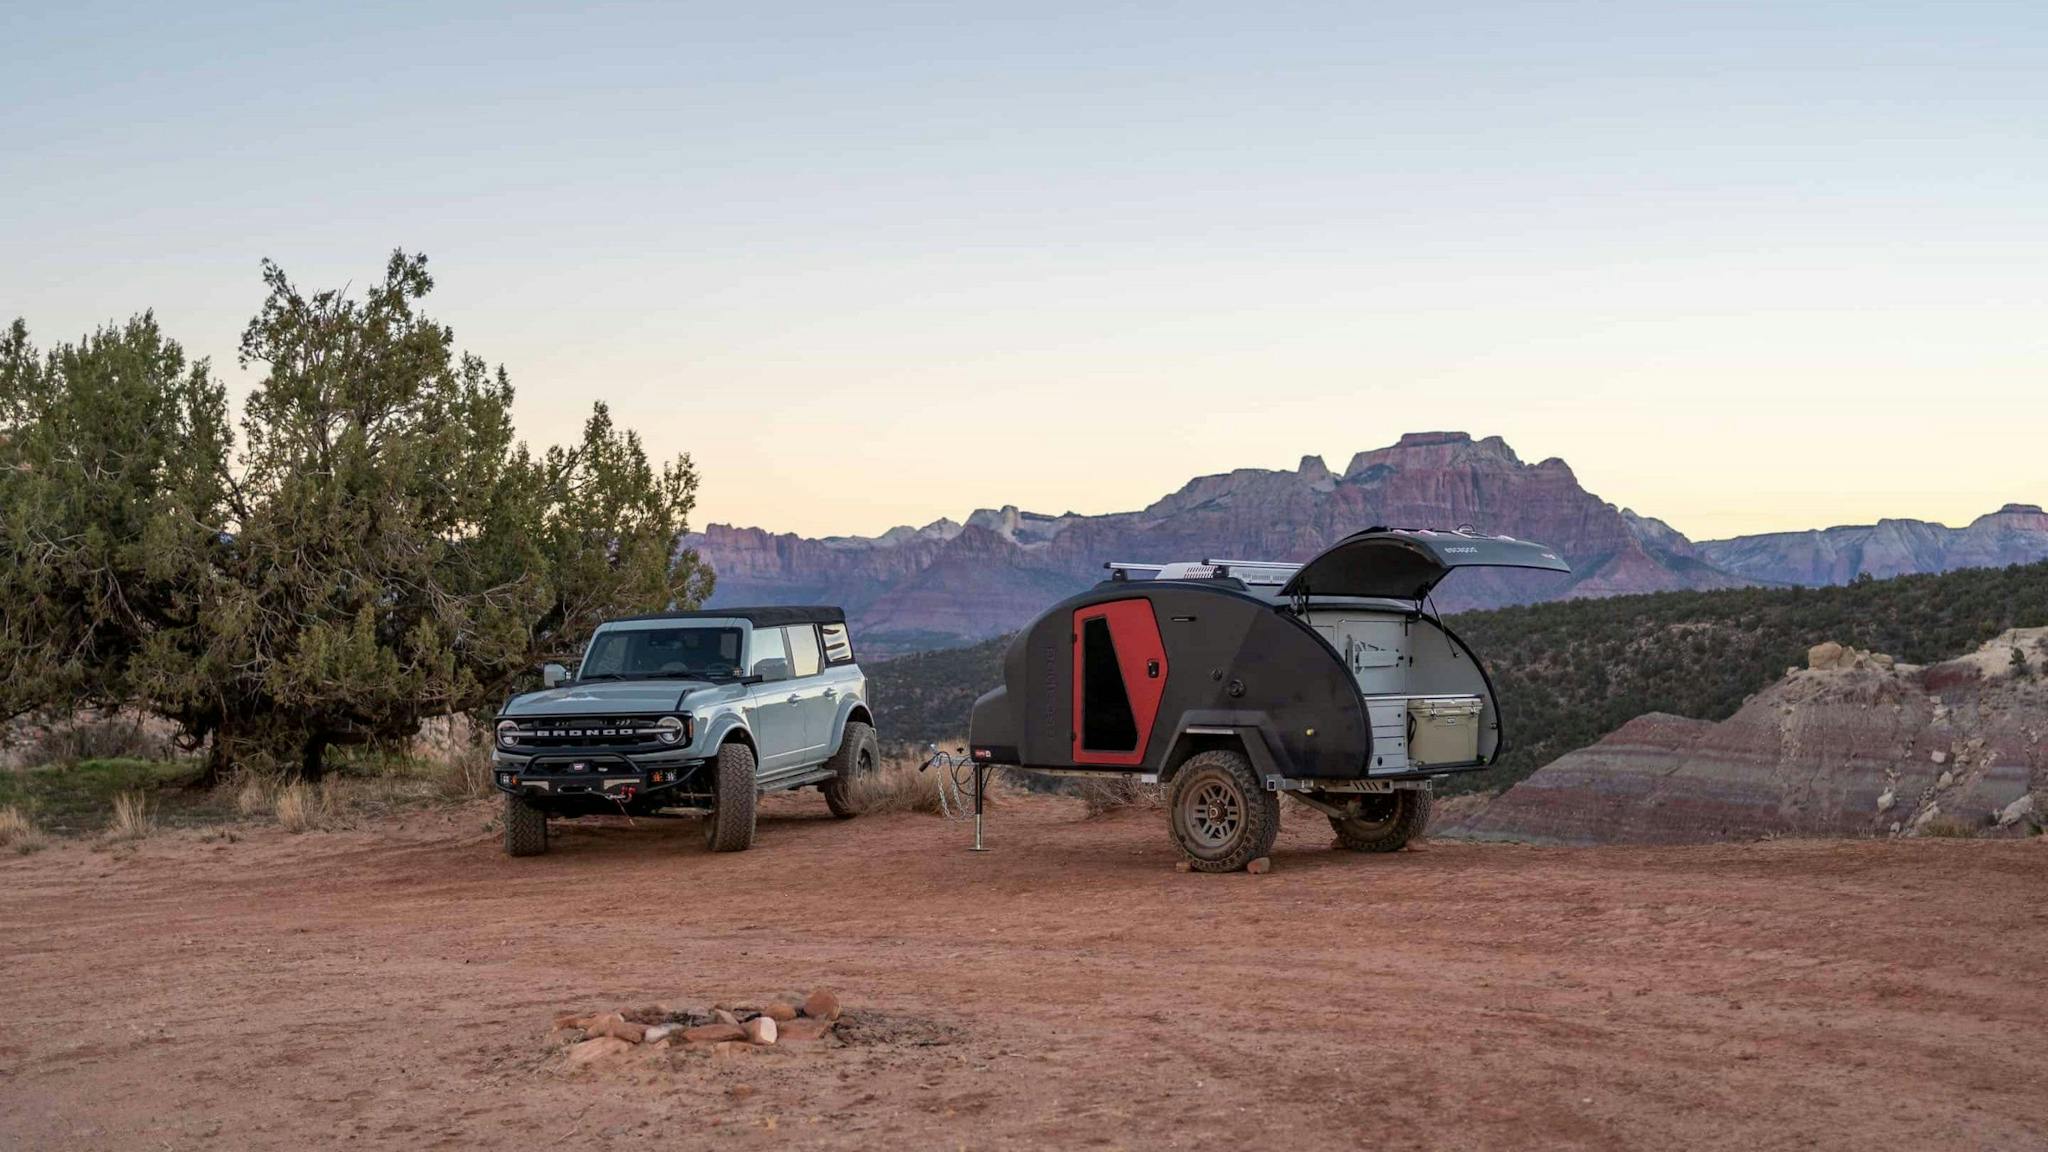 A navy blue teardrop camper being towed through desert landscape by a Ford Bronco.